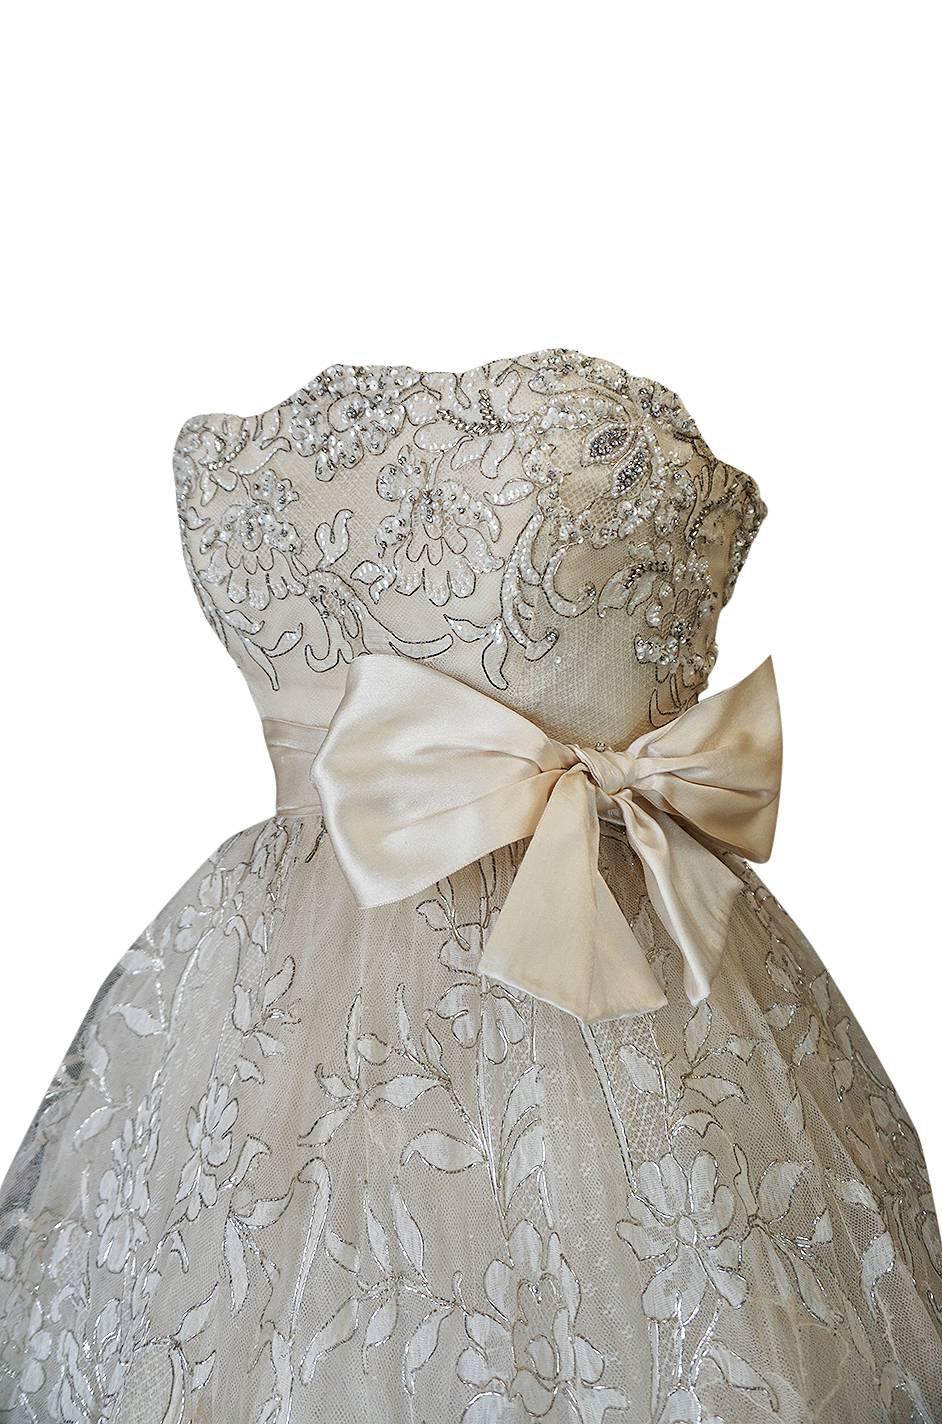 Women's Spring 1959 Christian Dior Haute Couture Ivory & Silver Lace Dress